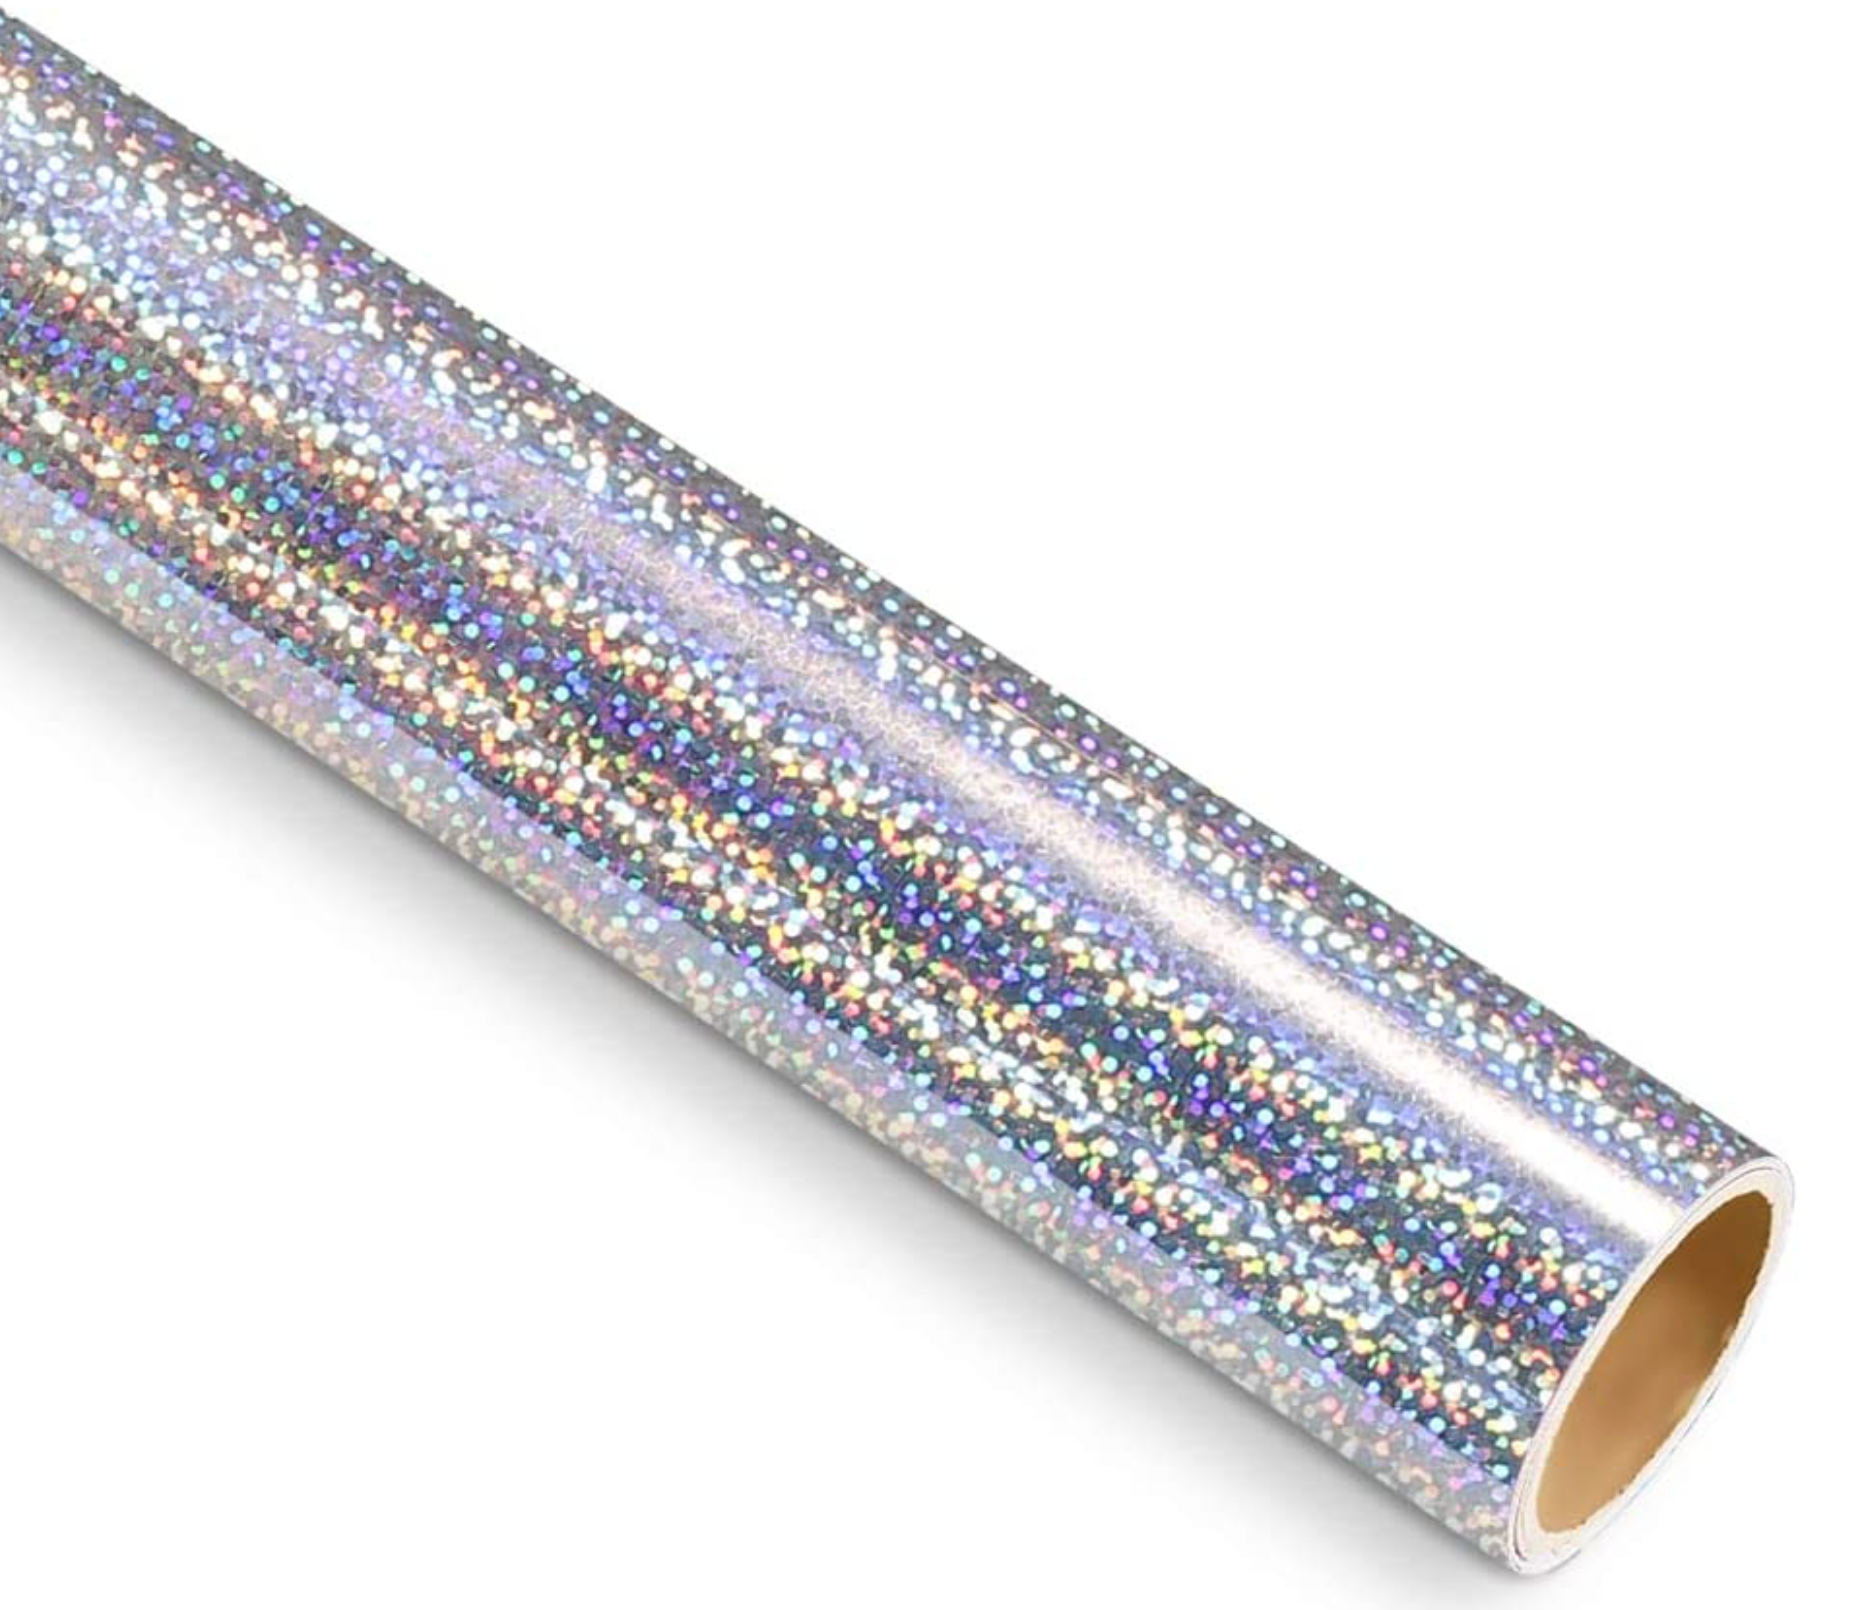 MOSAIC+ Silver Holographic Glitter — Craft Vinyl (1ft x 5ft) [MCF]